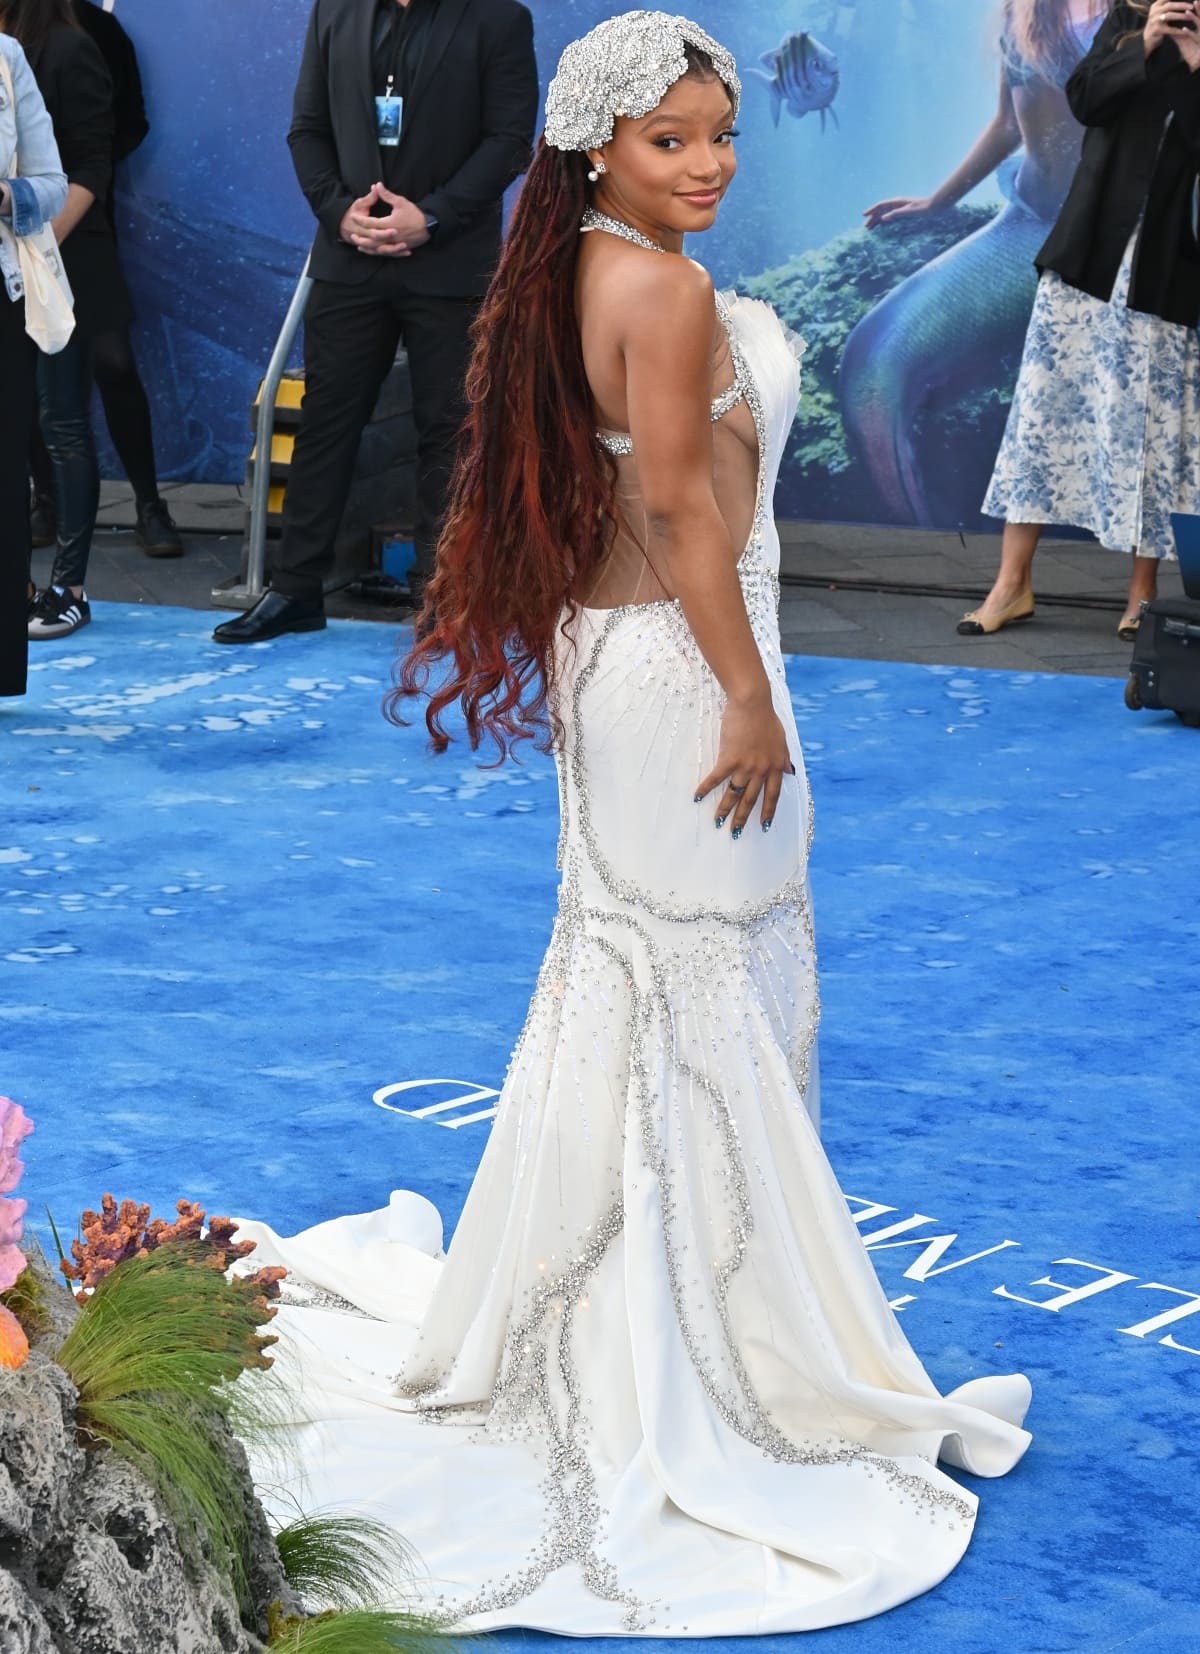 Halle Bailey’s custom Miss Sohee gown had a backless design and a flowing train that trailed behind her